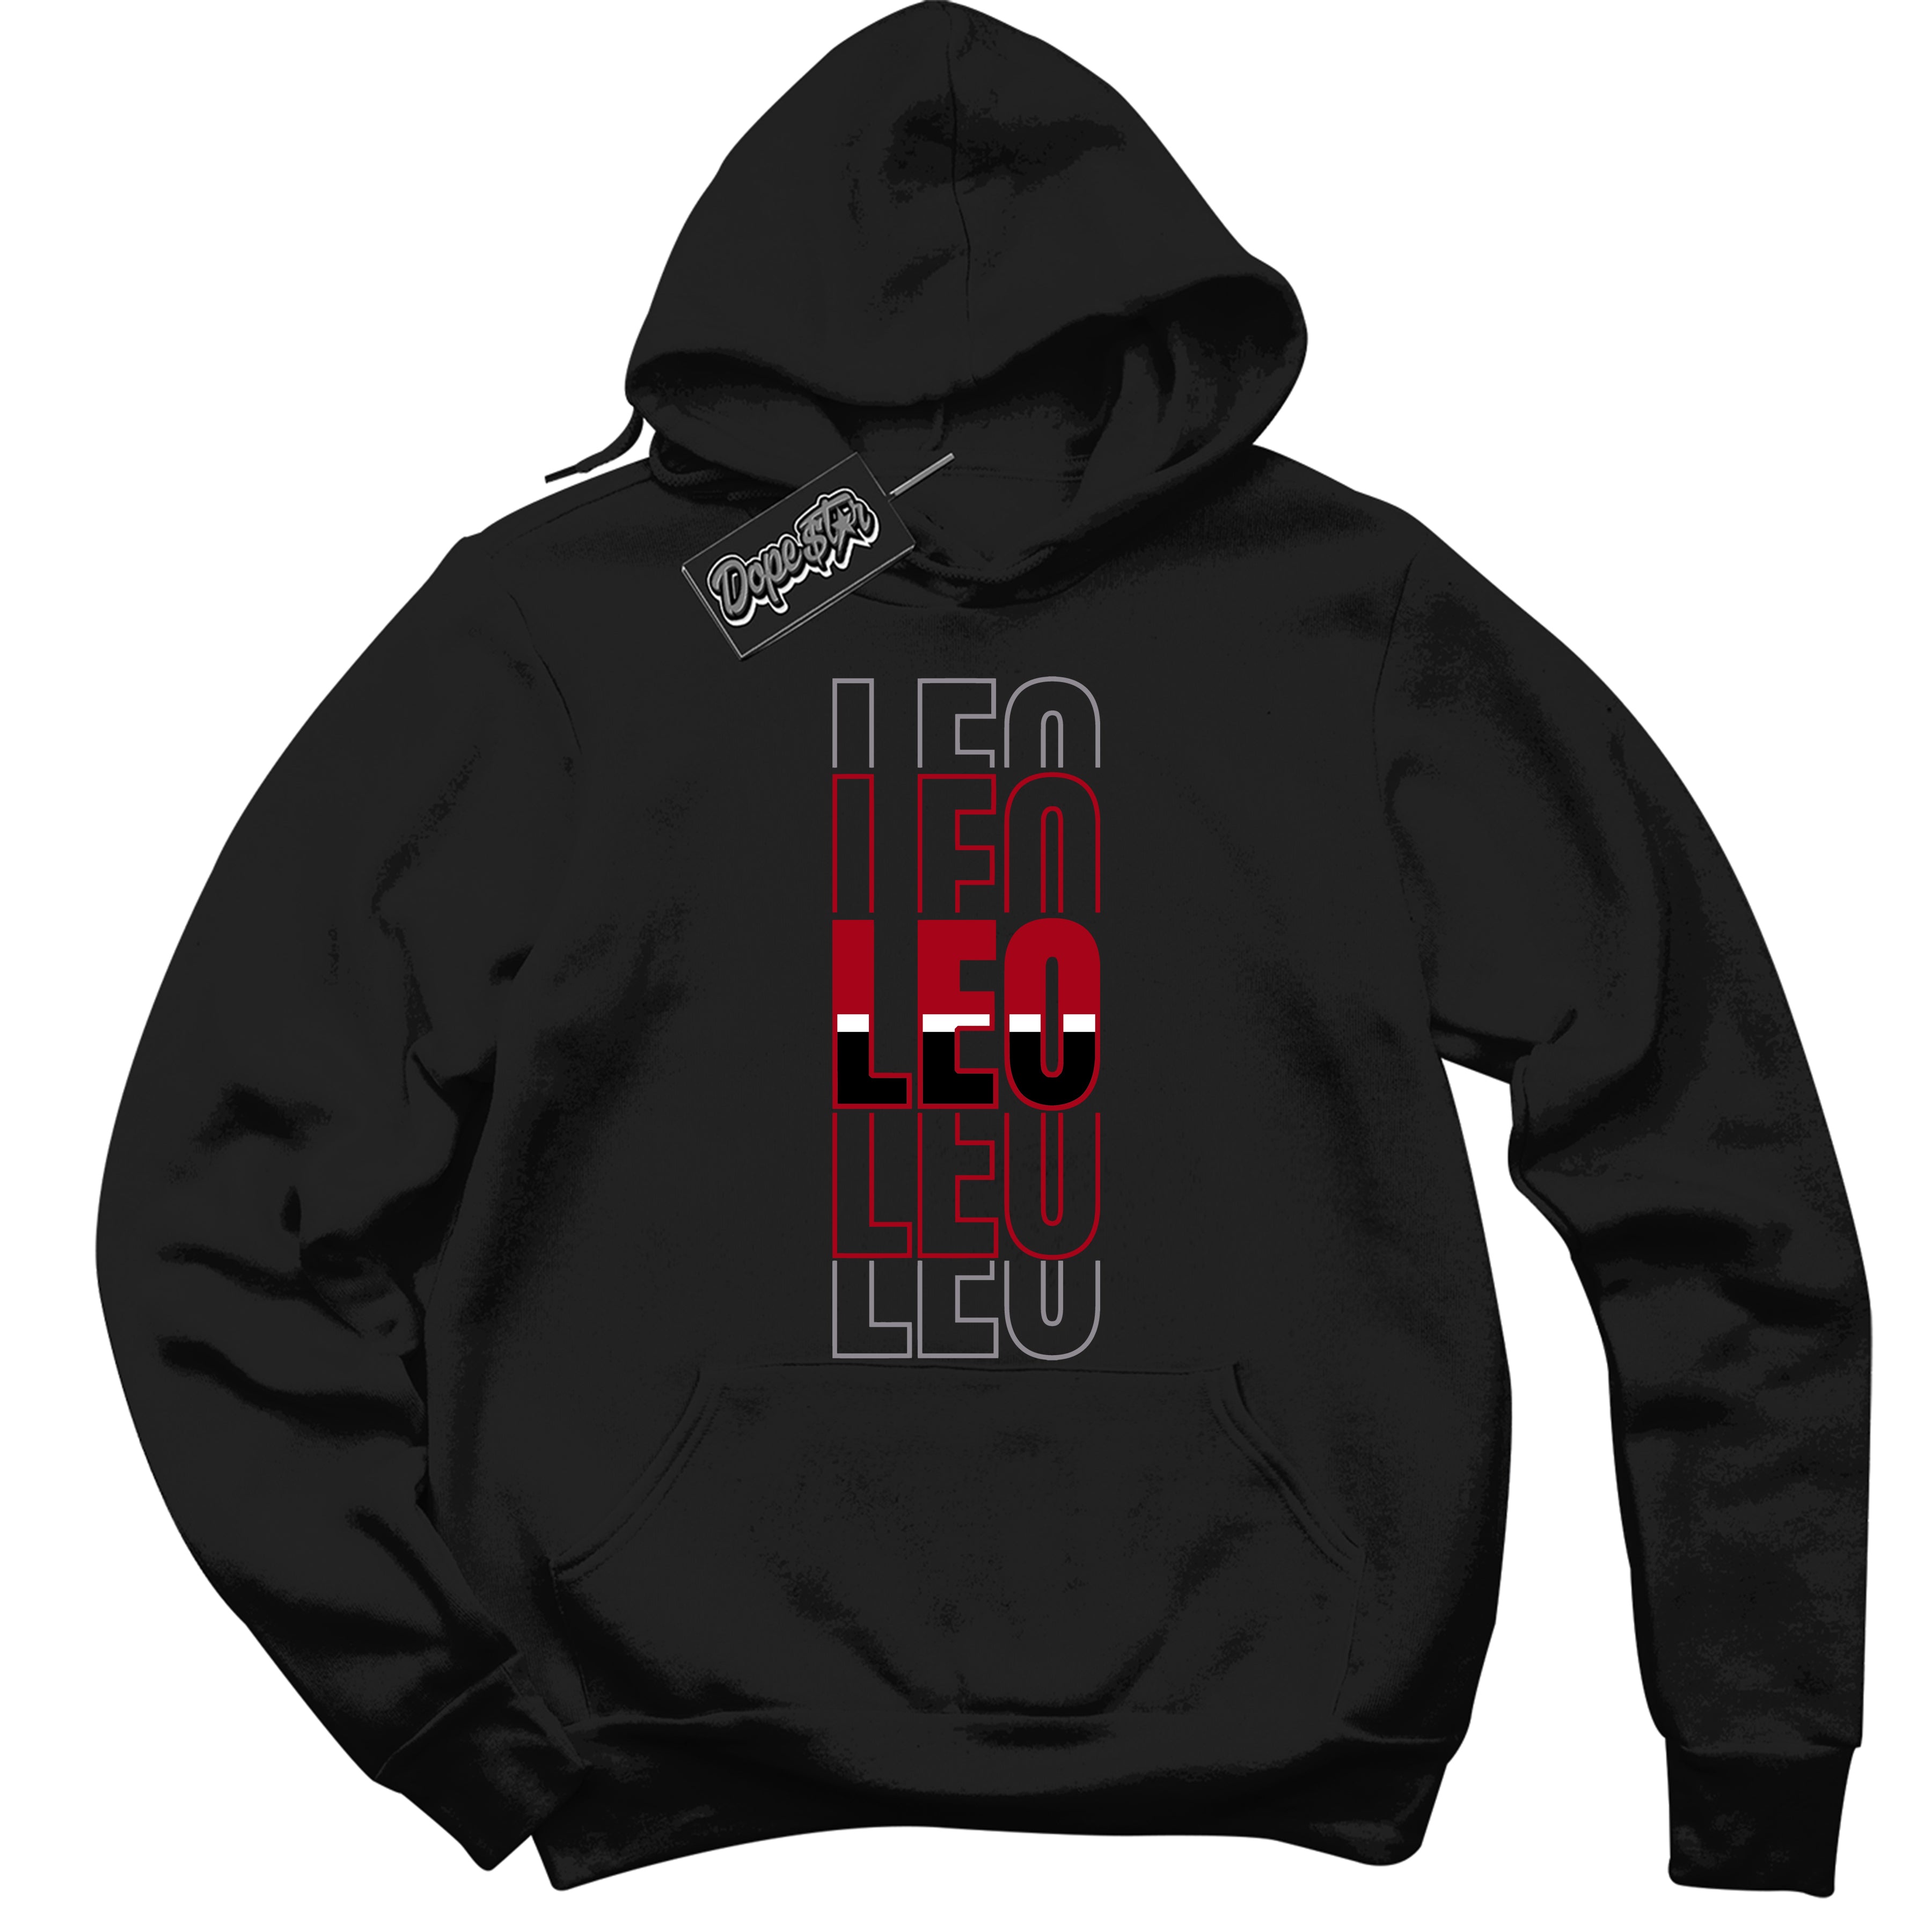 Cool Black Hoodie with “ Leo ”  design that Perfectly Matches  Bred Reimagined 4s Jordans.